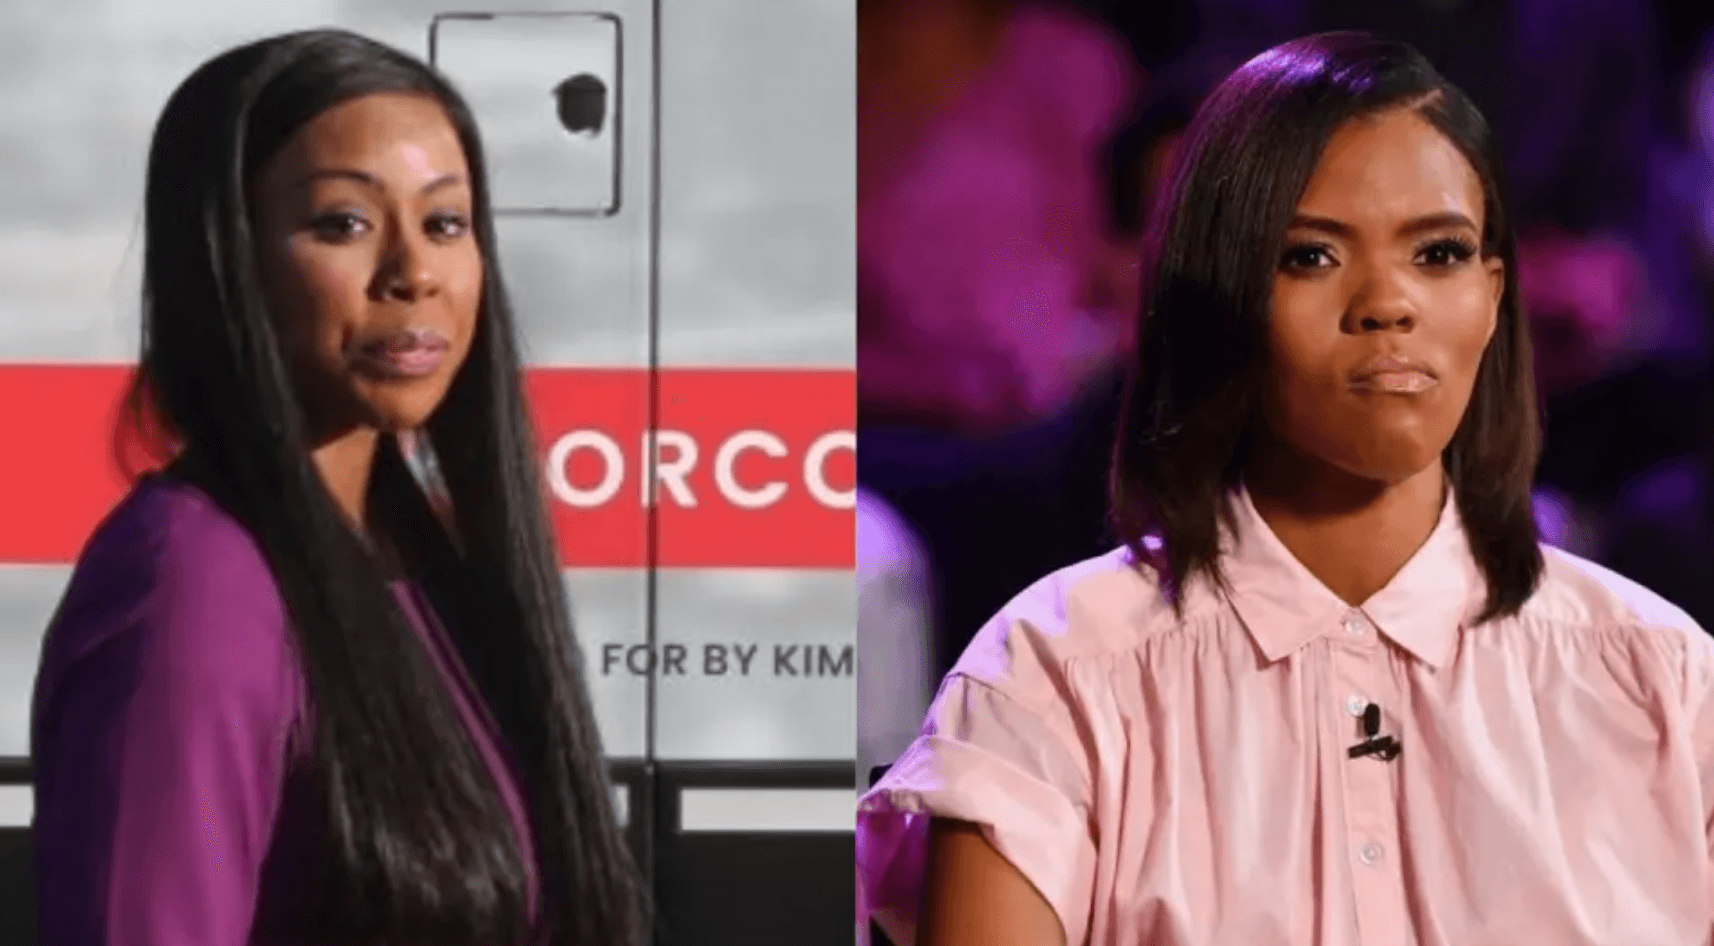 Republican Kim Klacik Just SUED Candace Owens for $20M. Here's Why.